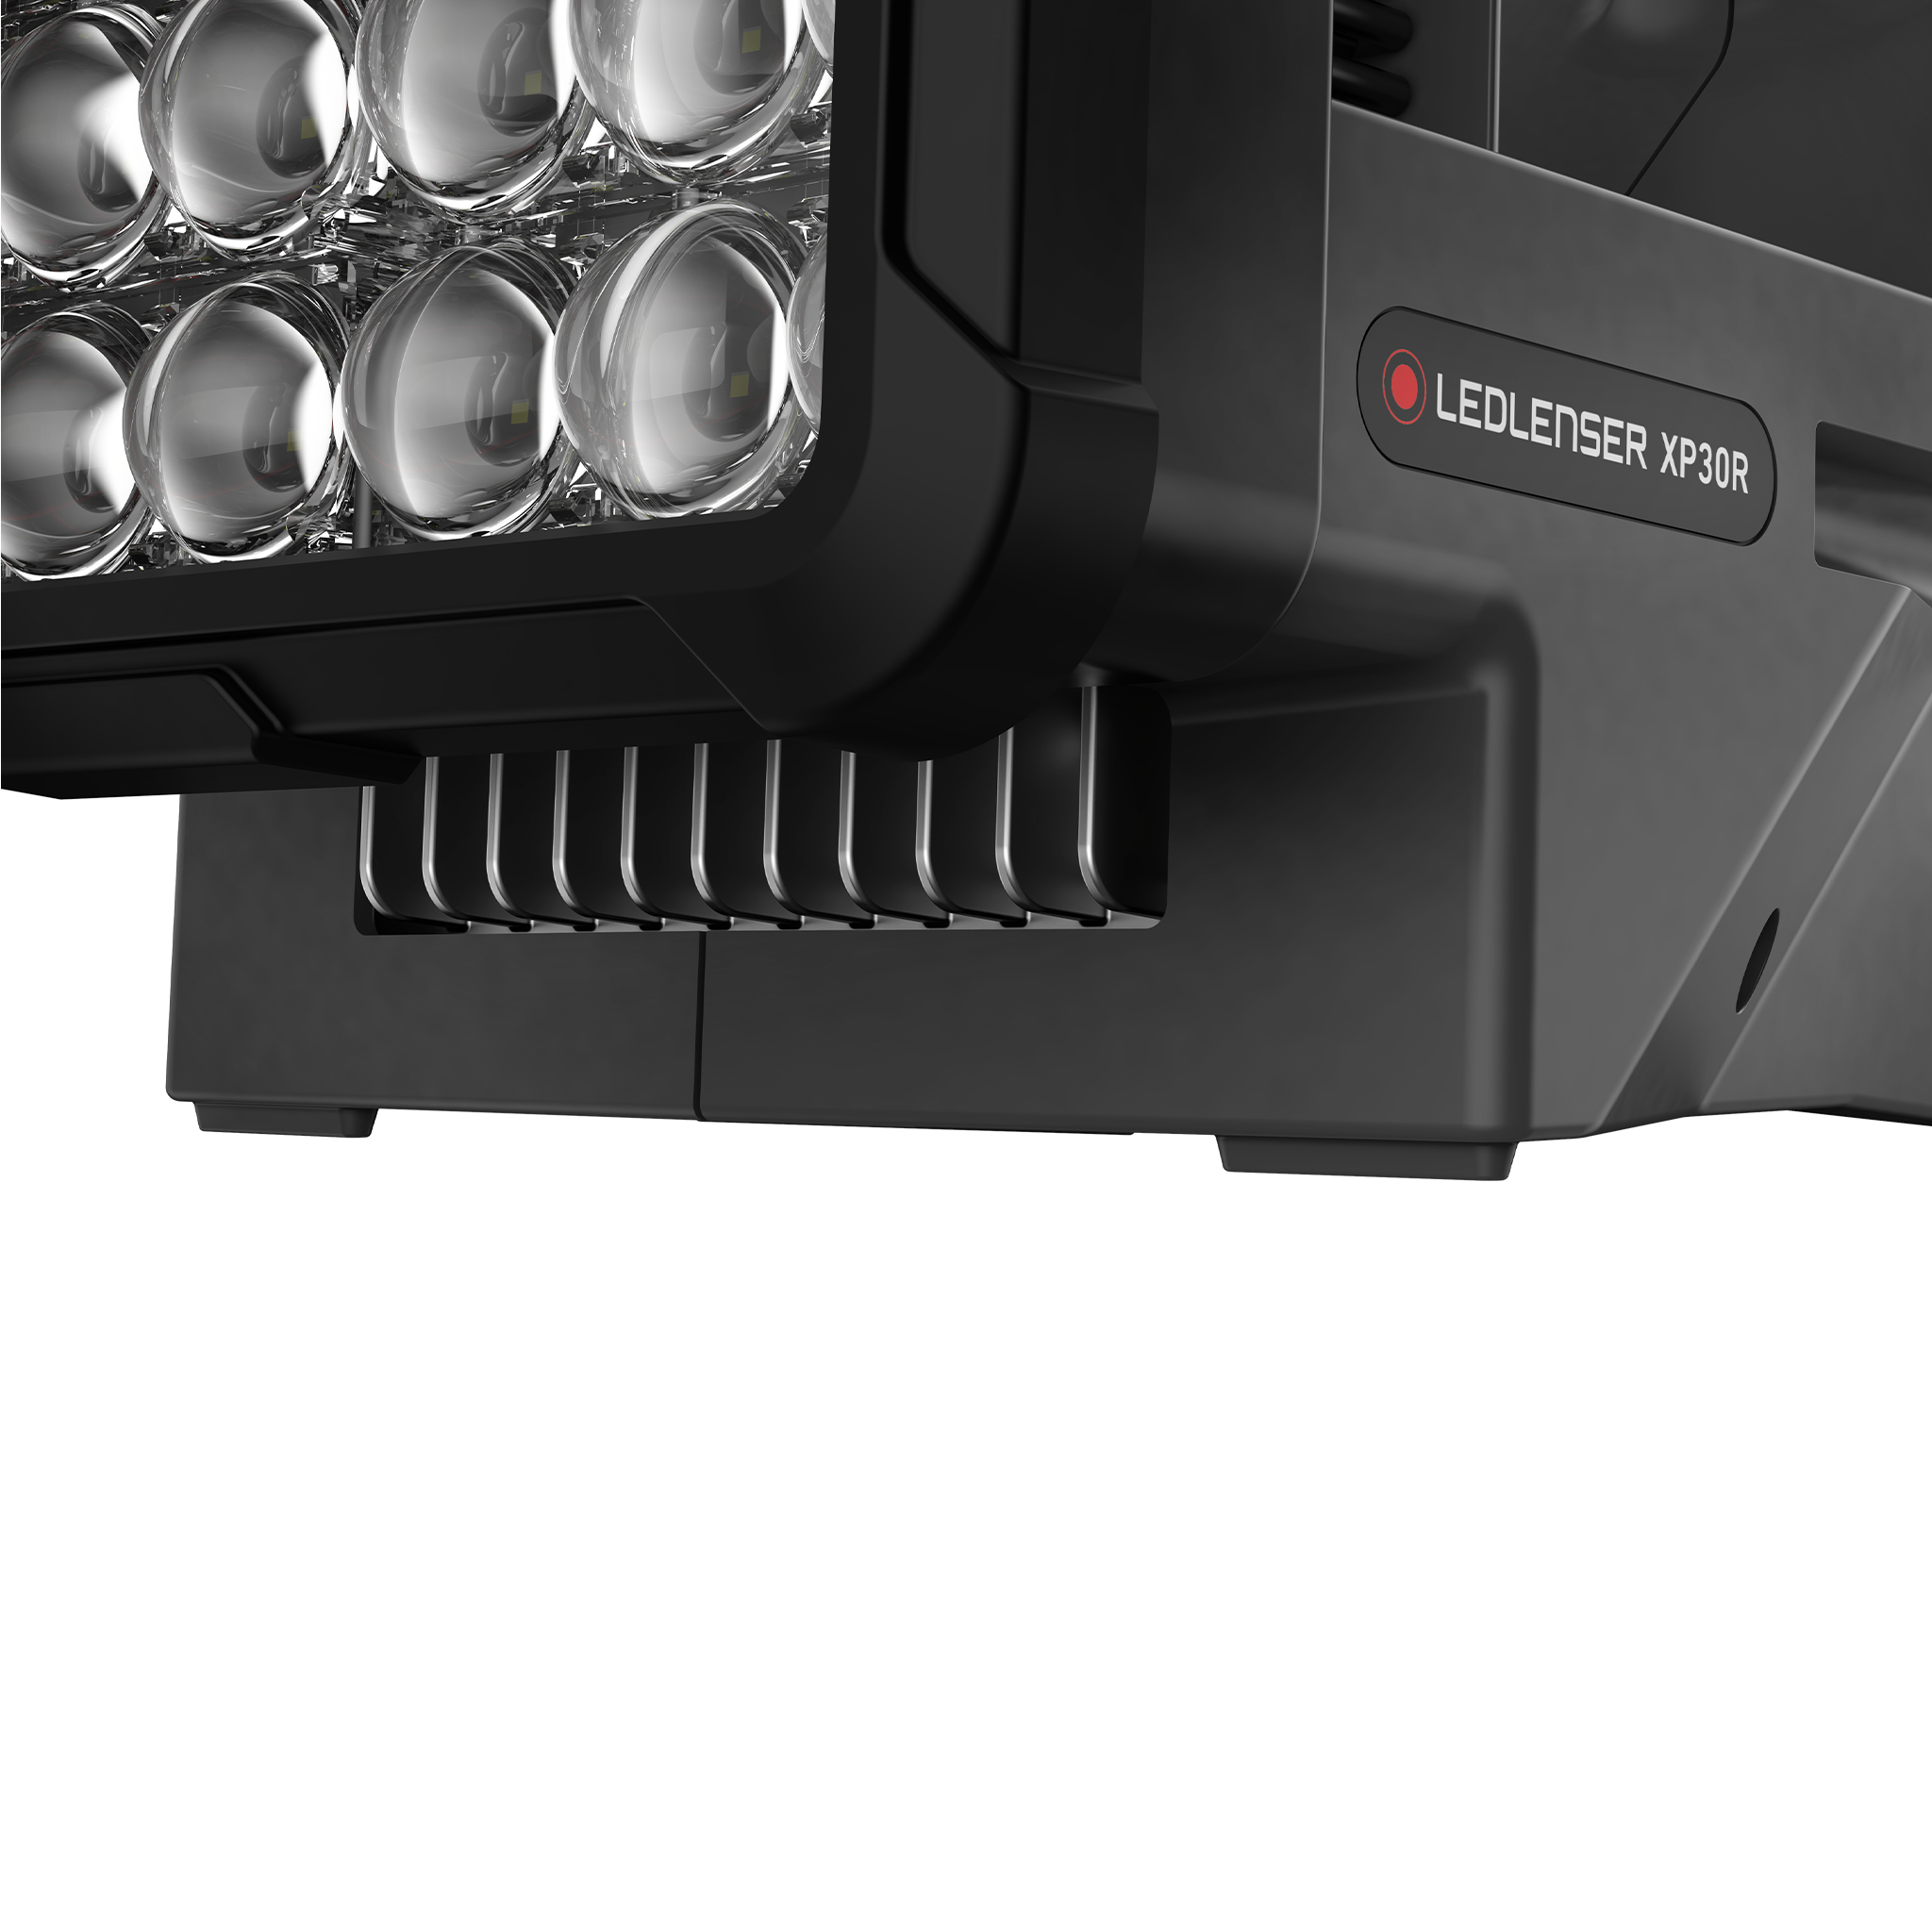 XP30R Rechargeable LED Searchlight